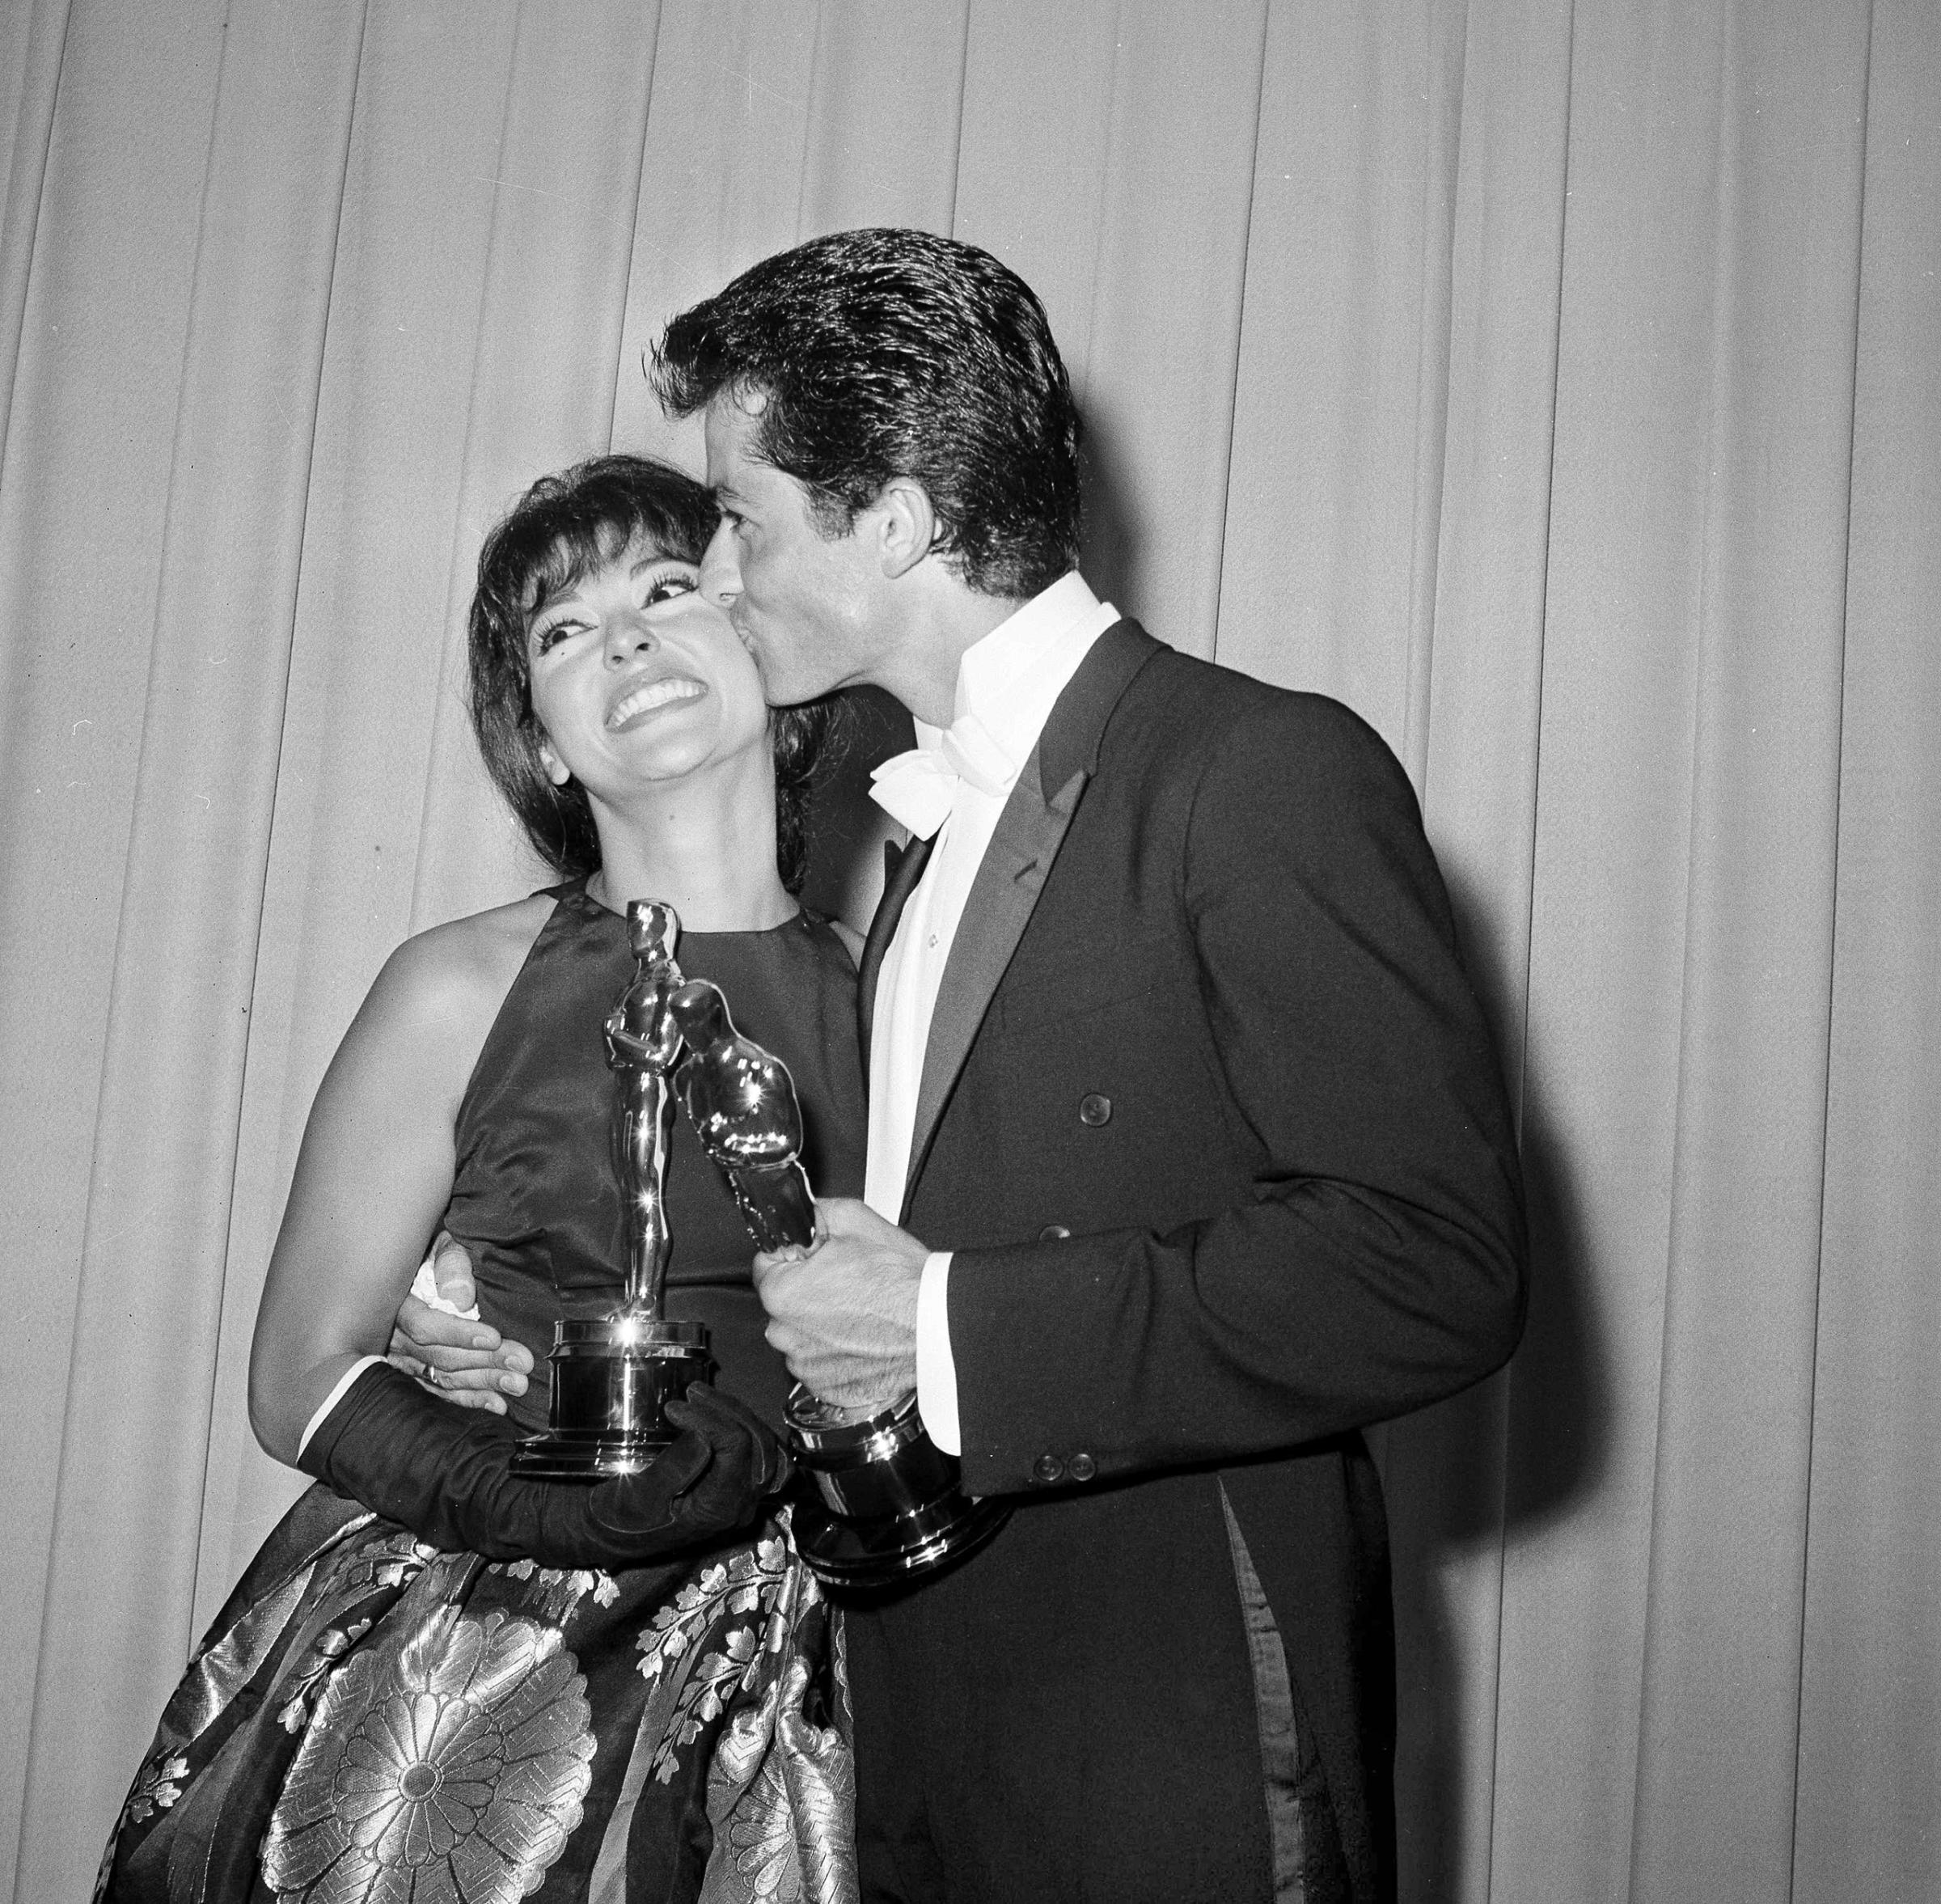 Rita Moreno gets a kiss from dancer and actor George Chakiris after they each won Academy Awards, 1962.